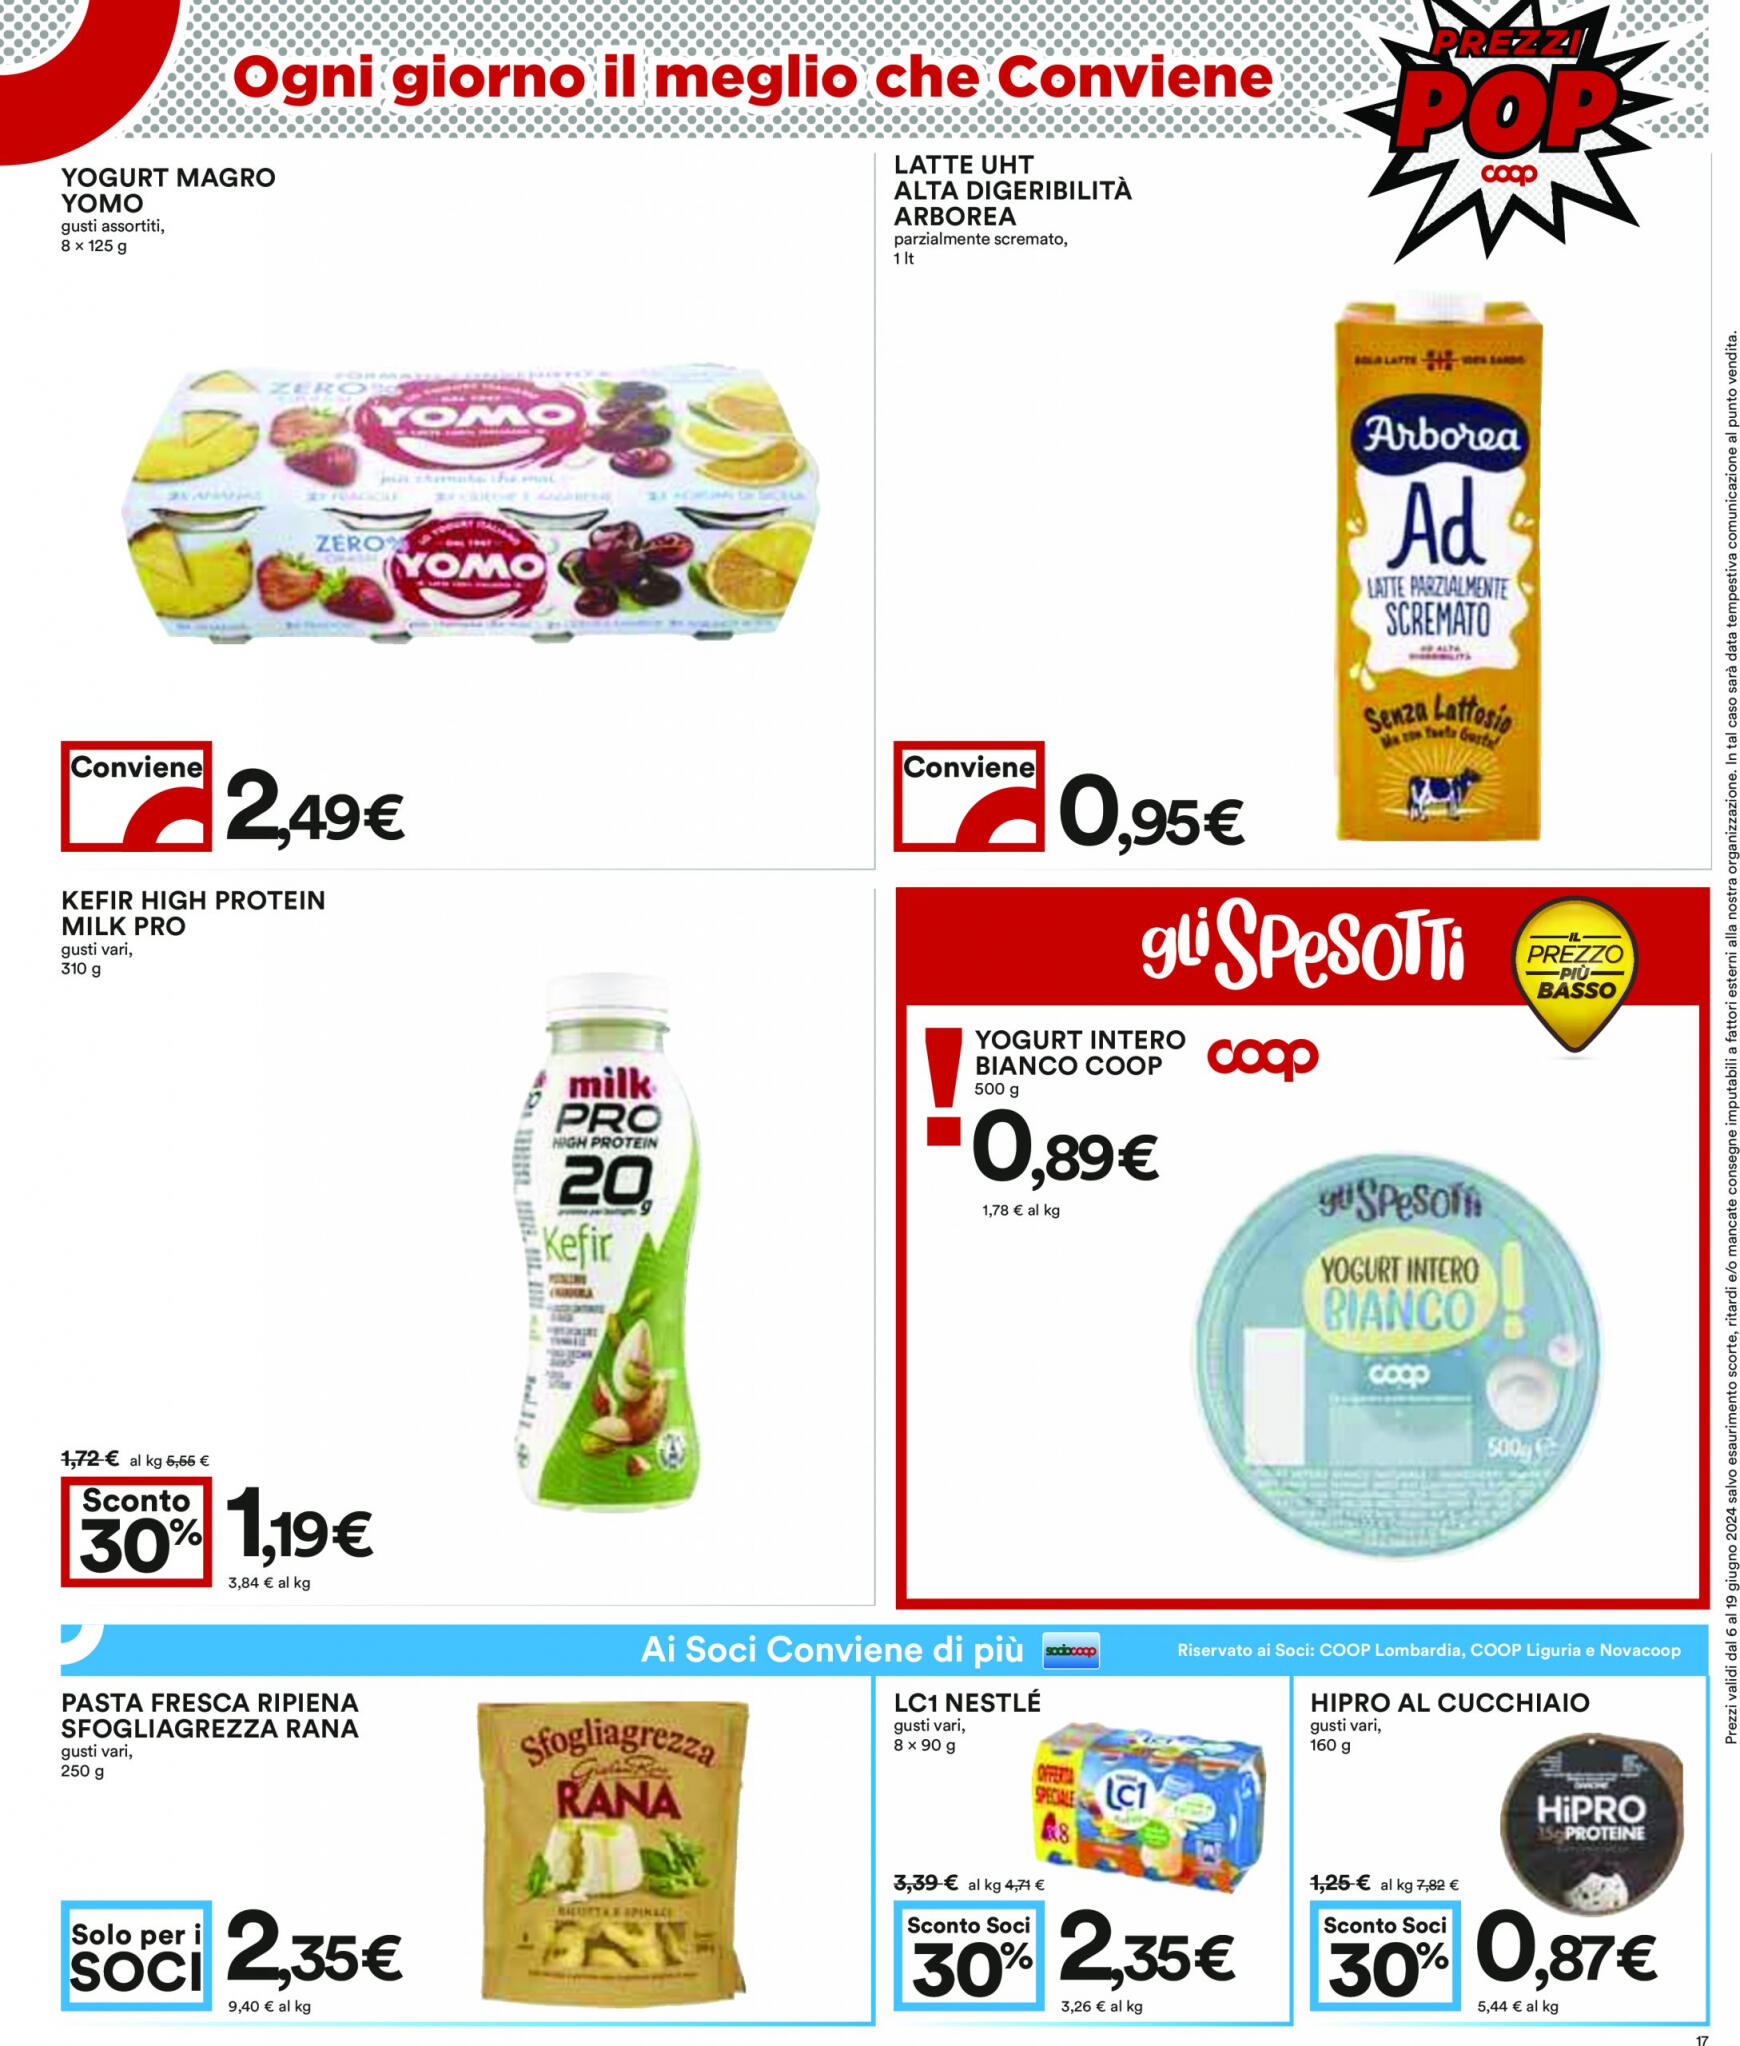 coop - Nuovo volantino Coop 10.06. - 19.06. - page: 17